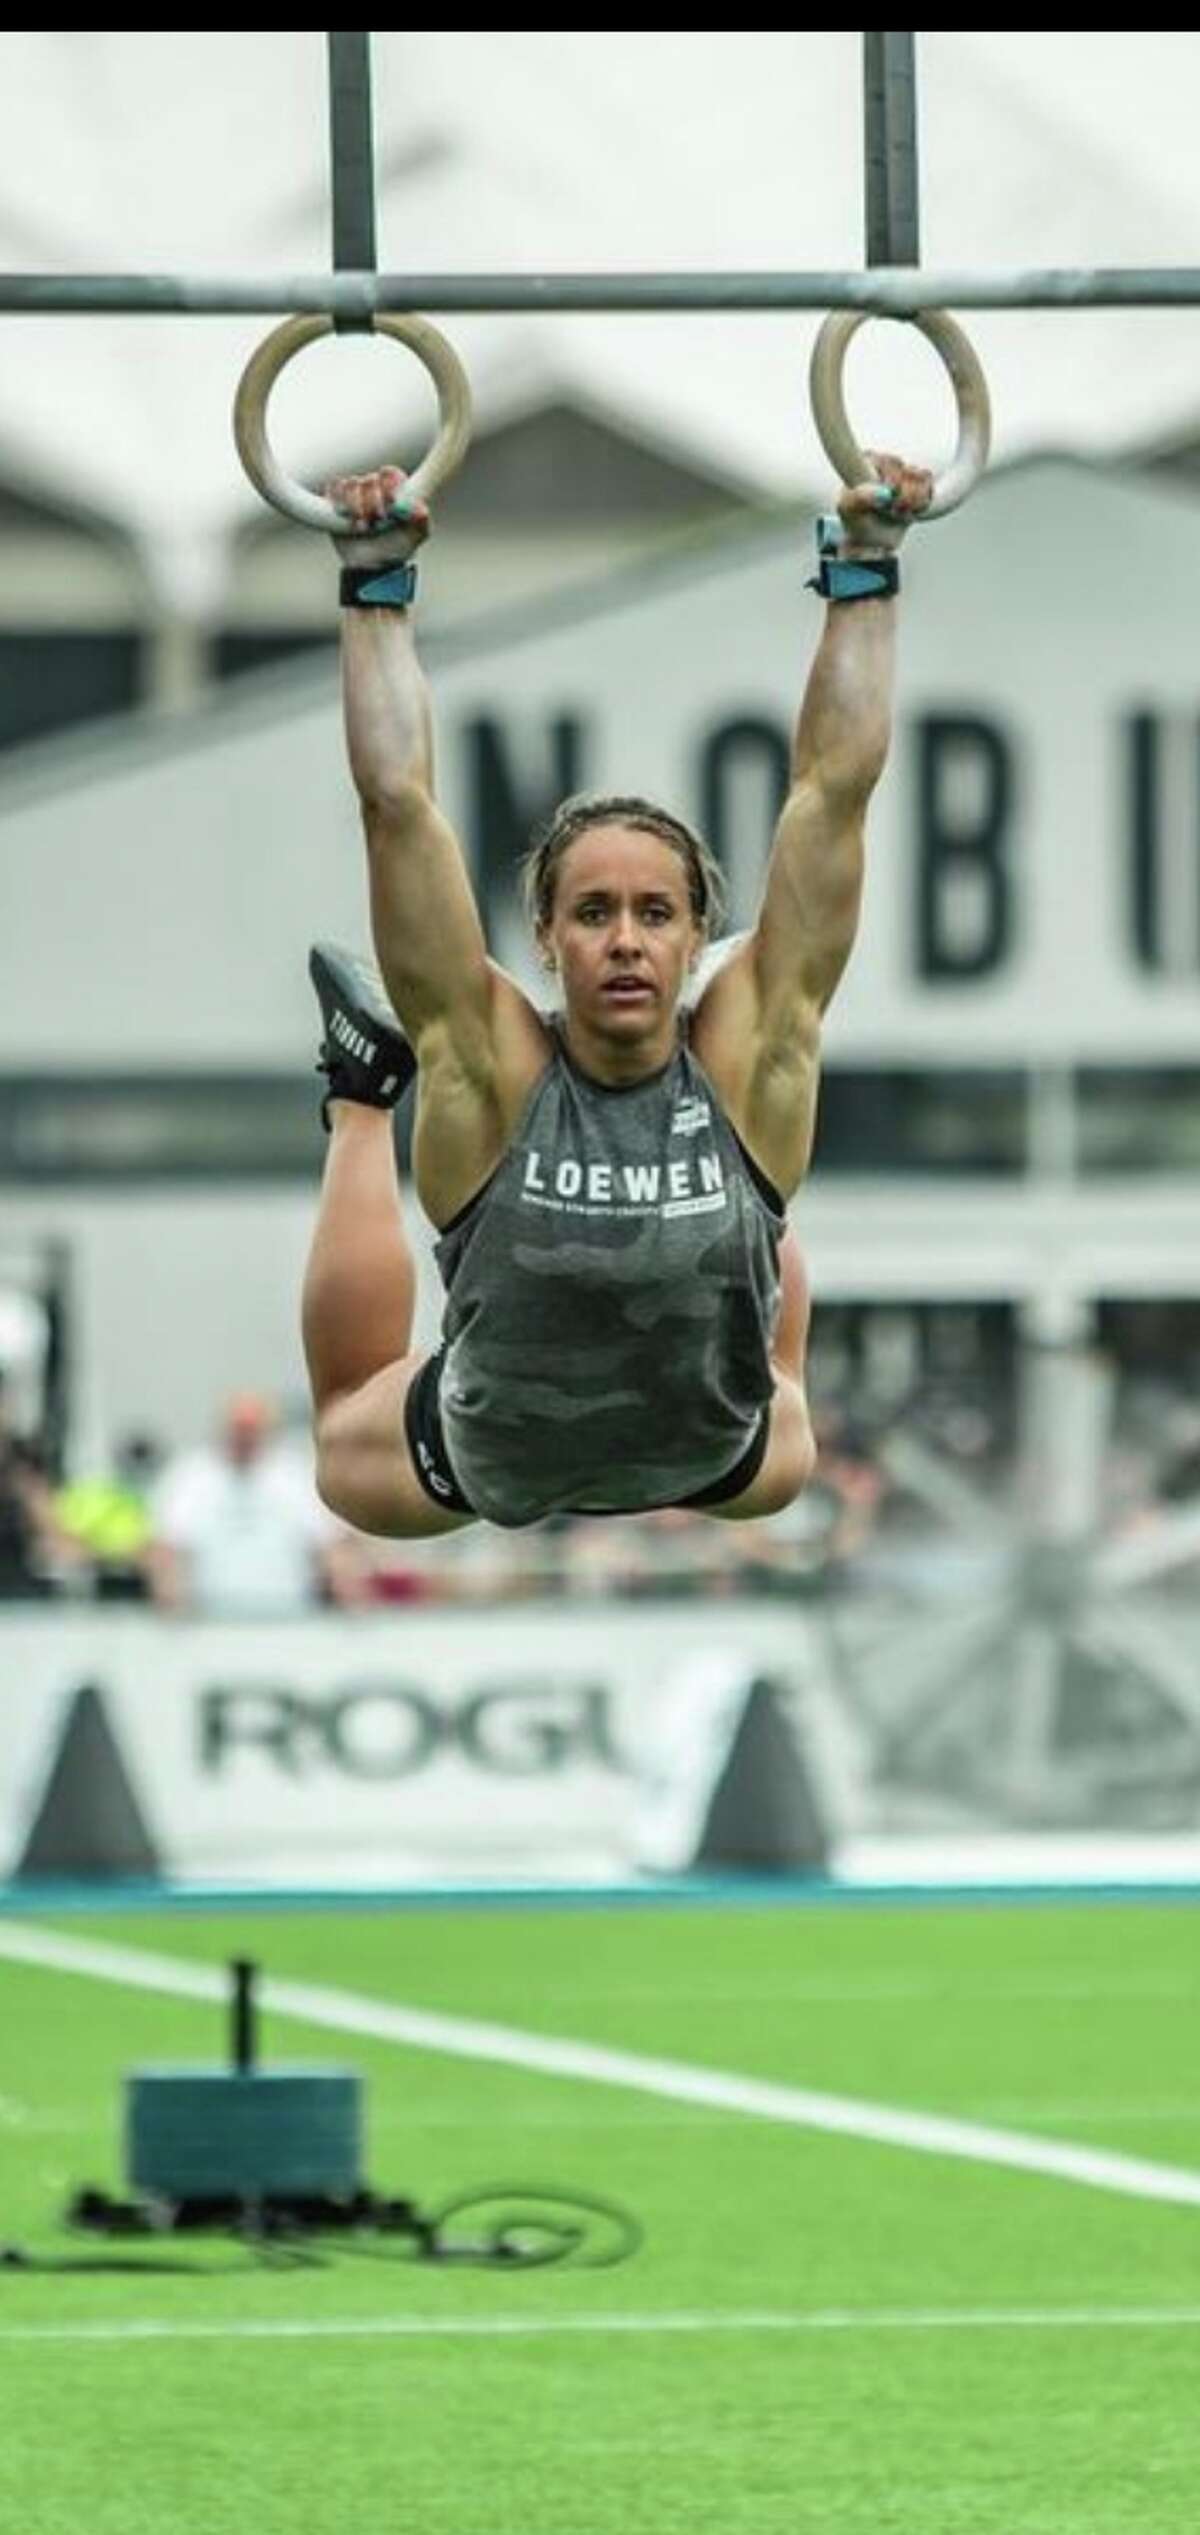 Midland's Arielle Loewen is shown competing at the NOBULL 2021 Crossfit Games. 